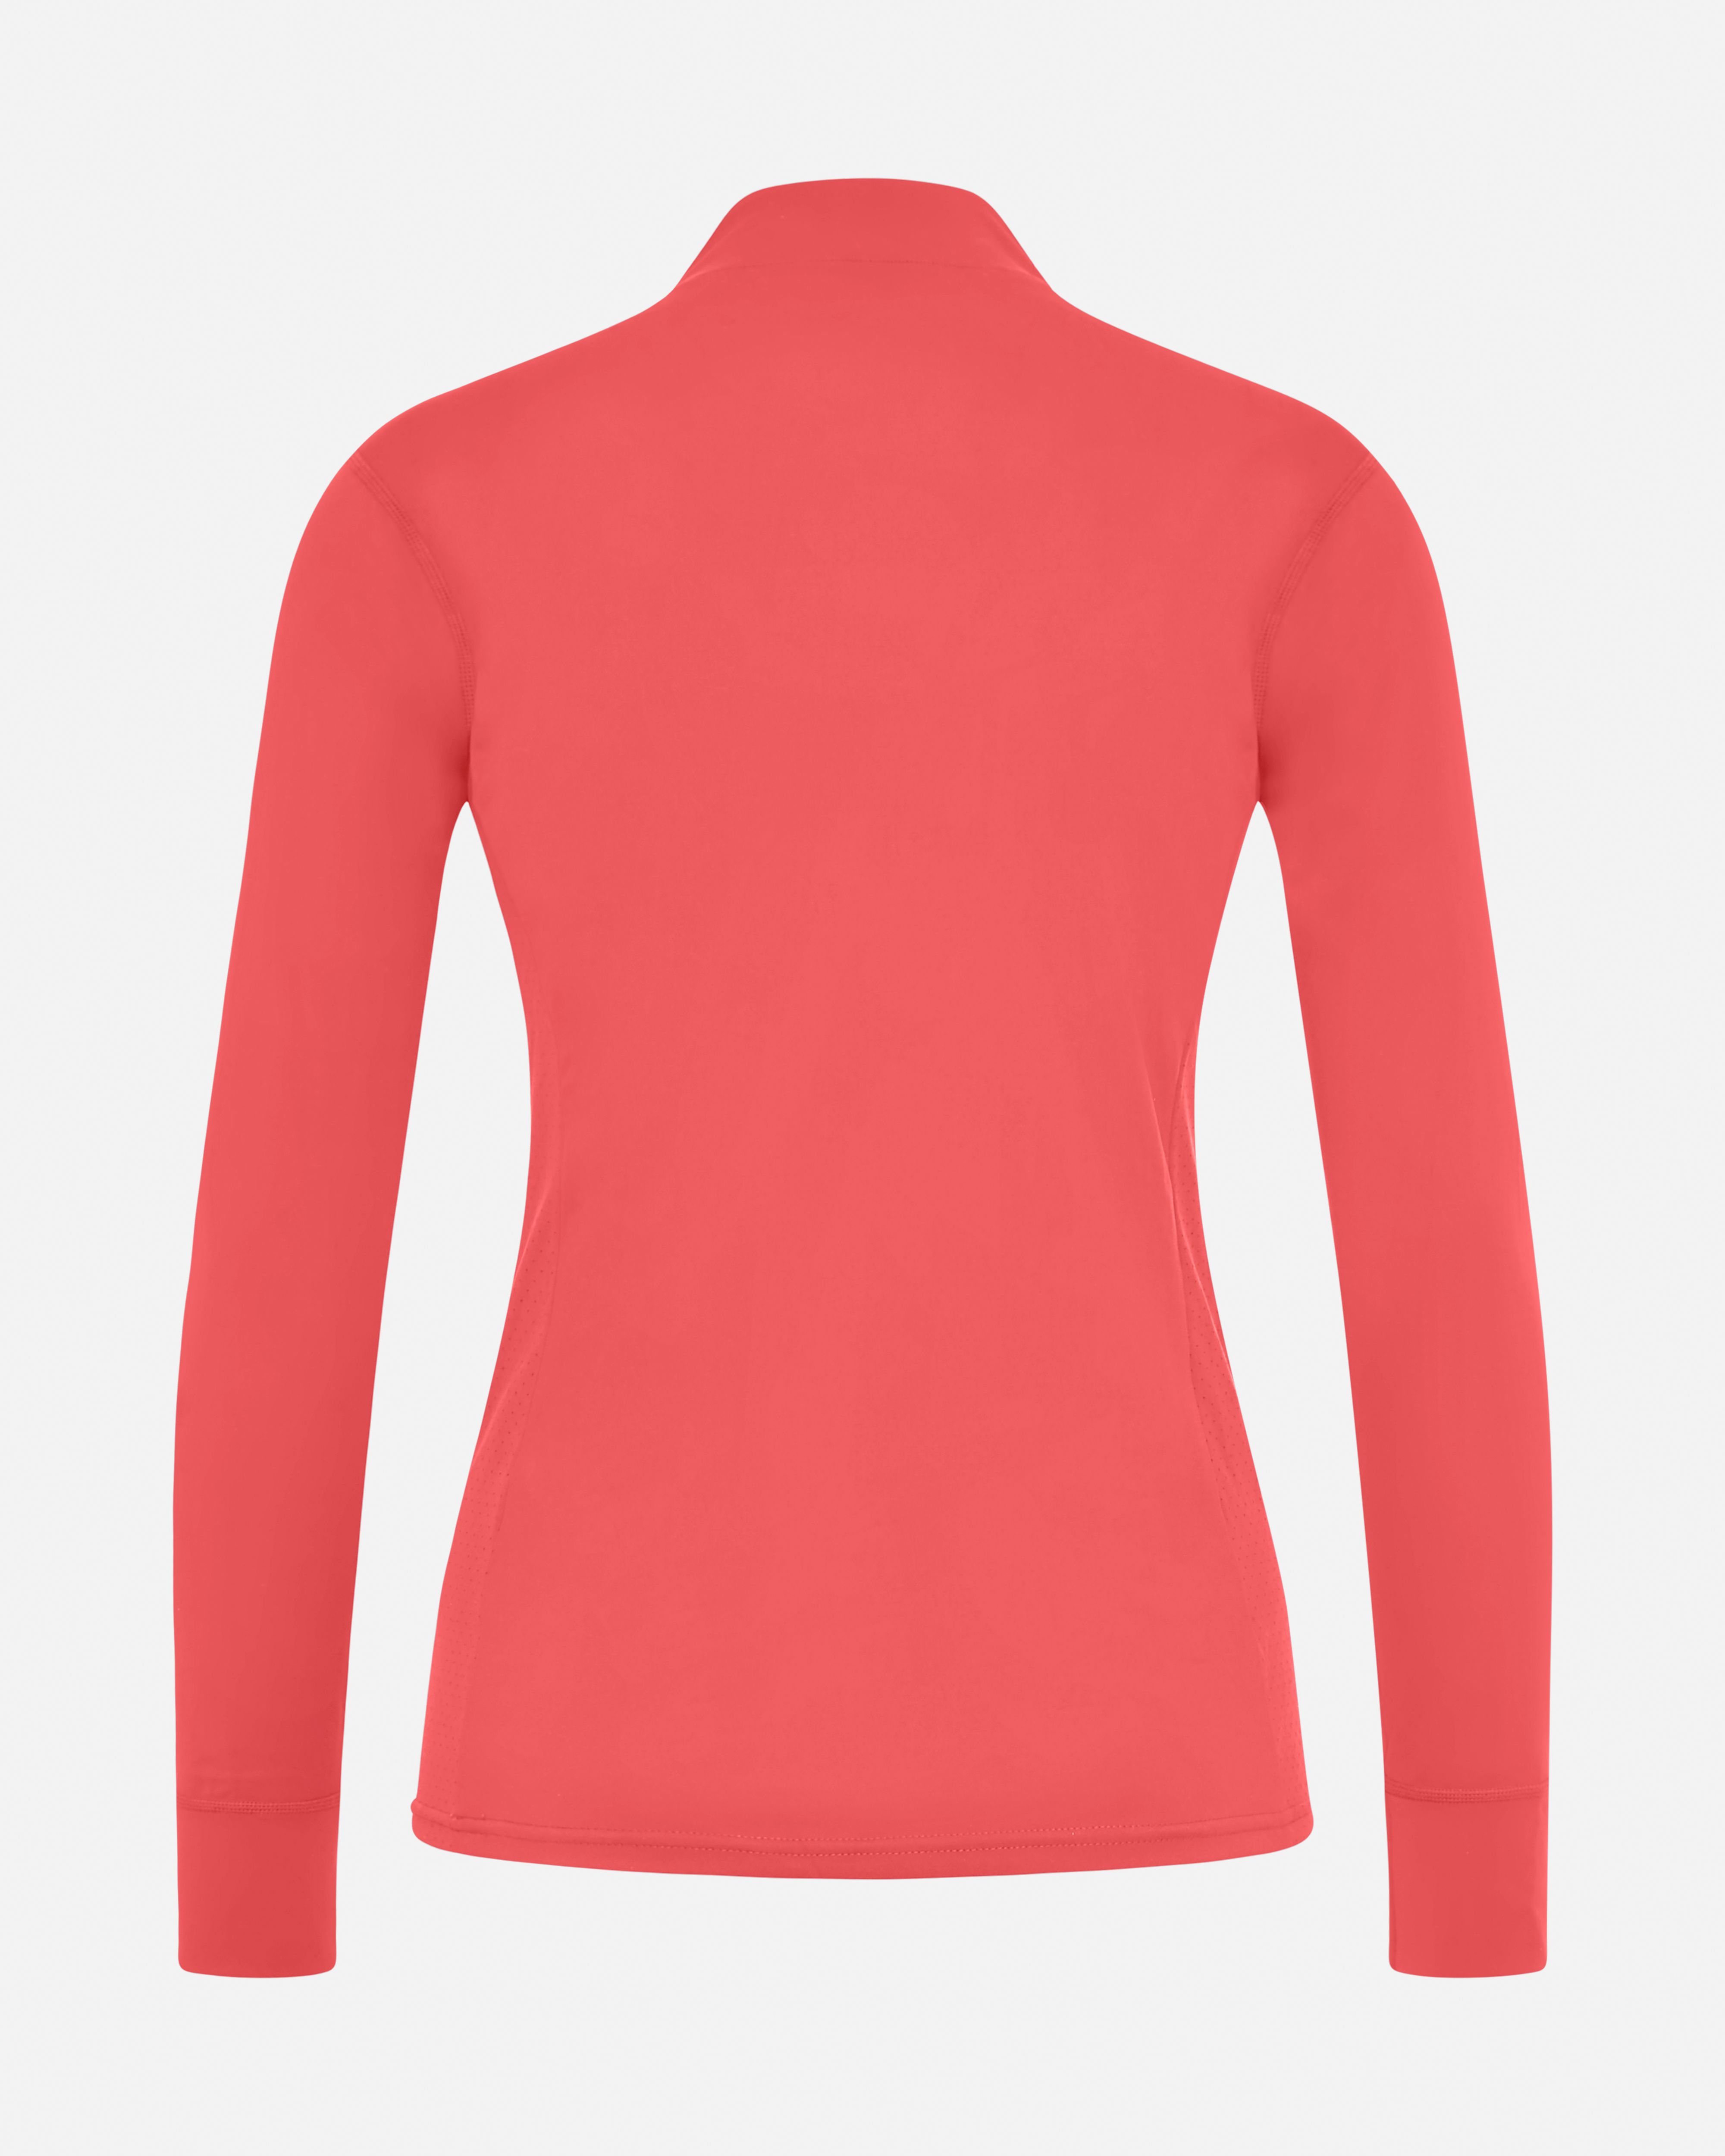 eaSt UV-Protection Shirt | Coral | XS